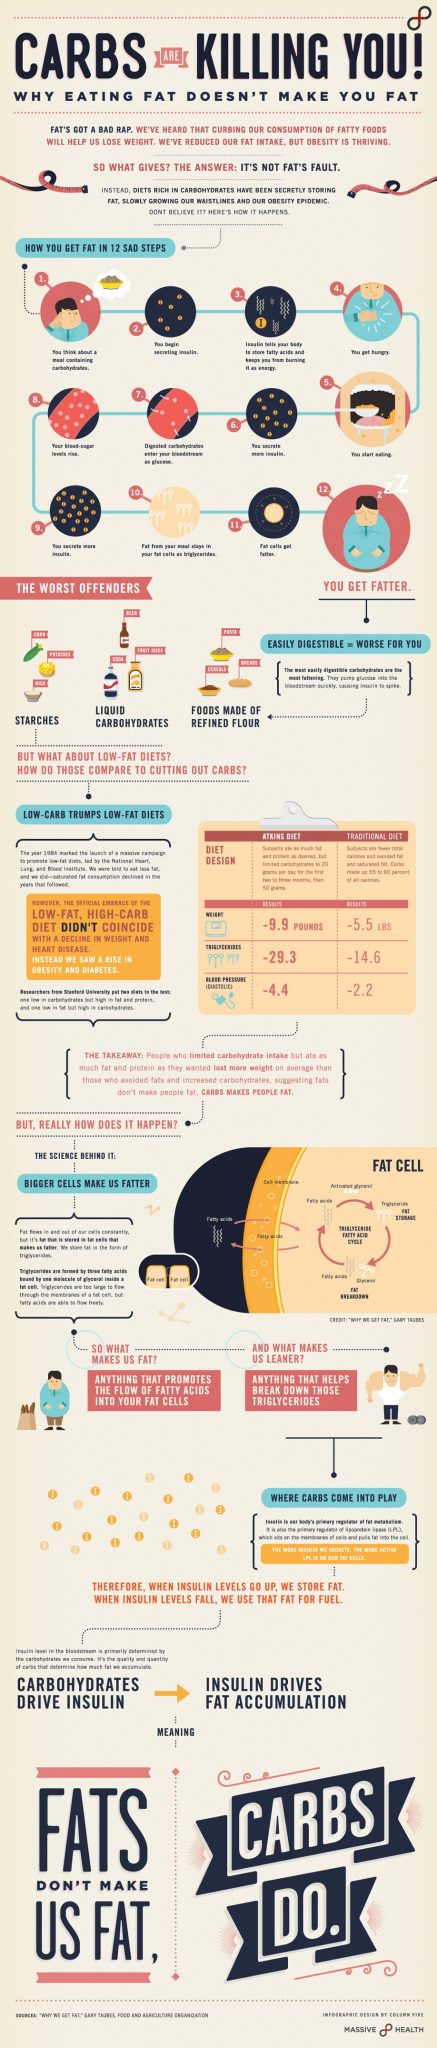 massive-health-infographic-carbs-are-killing-you-eating-fat-doesnt-make-you-fat